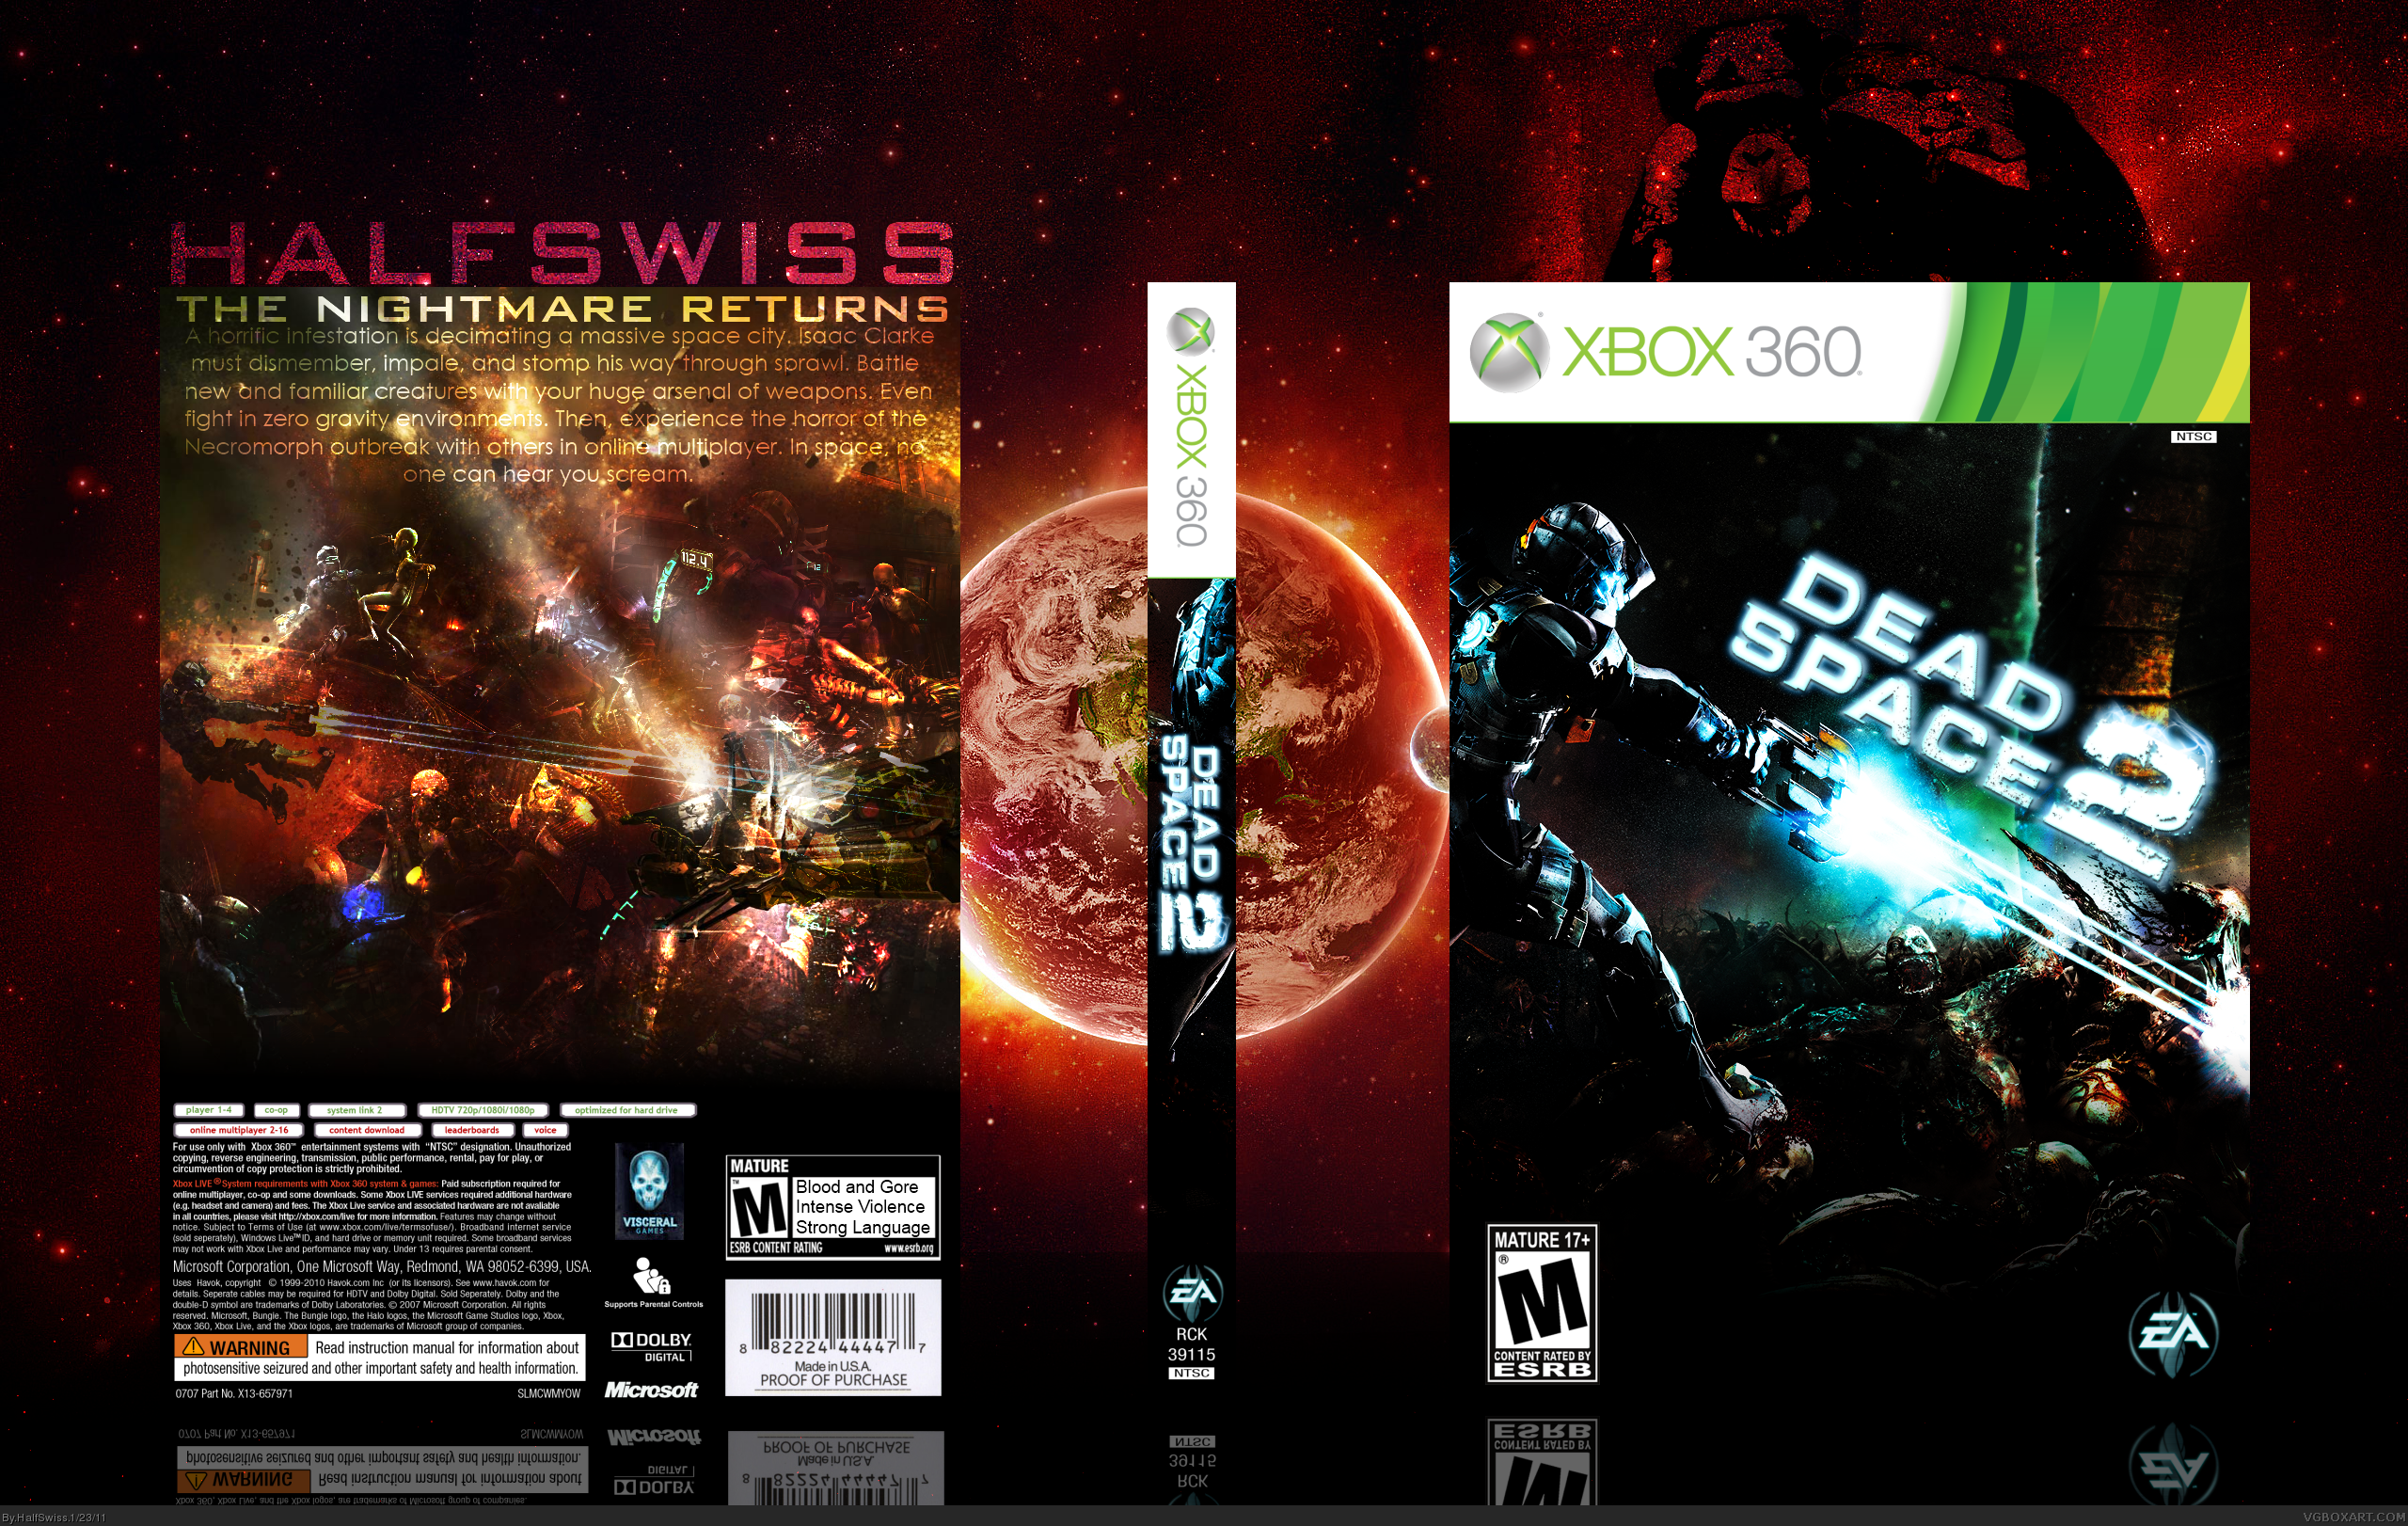 Dead Space Xbox 360 обложка. Cover Xbox 360 Dead Space 2. Dead Space 2 (Xbox 360). Dead Space 2 обложка Xbox 360e freeboot. Your space 2